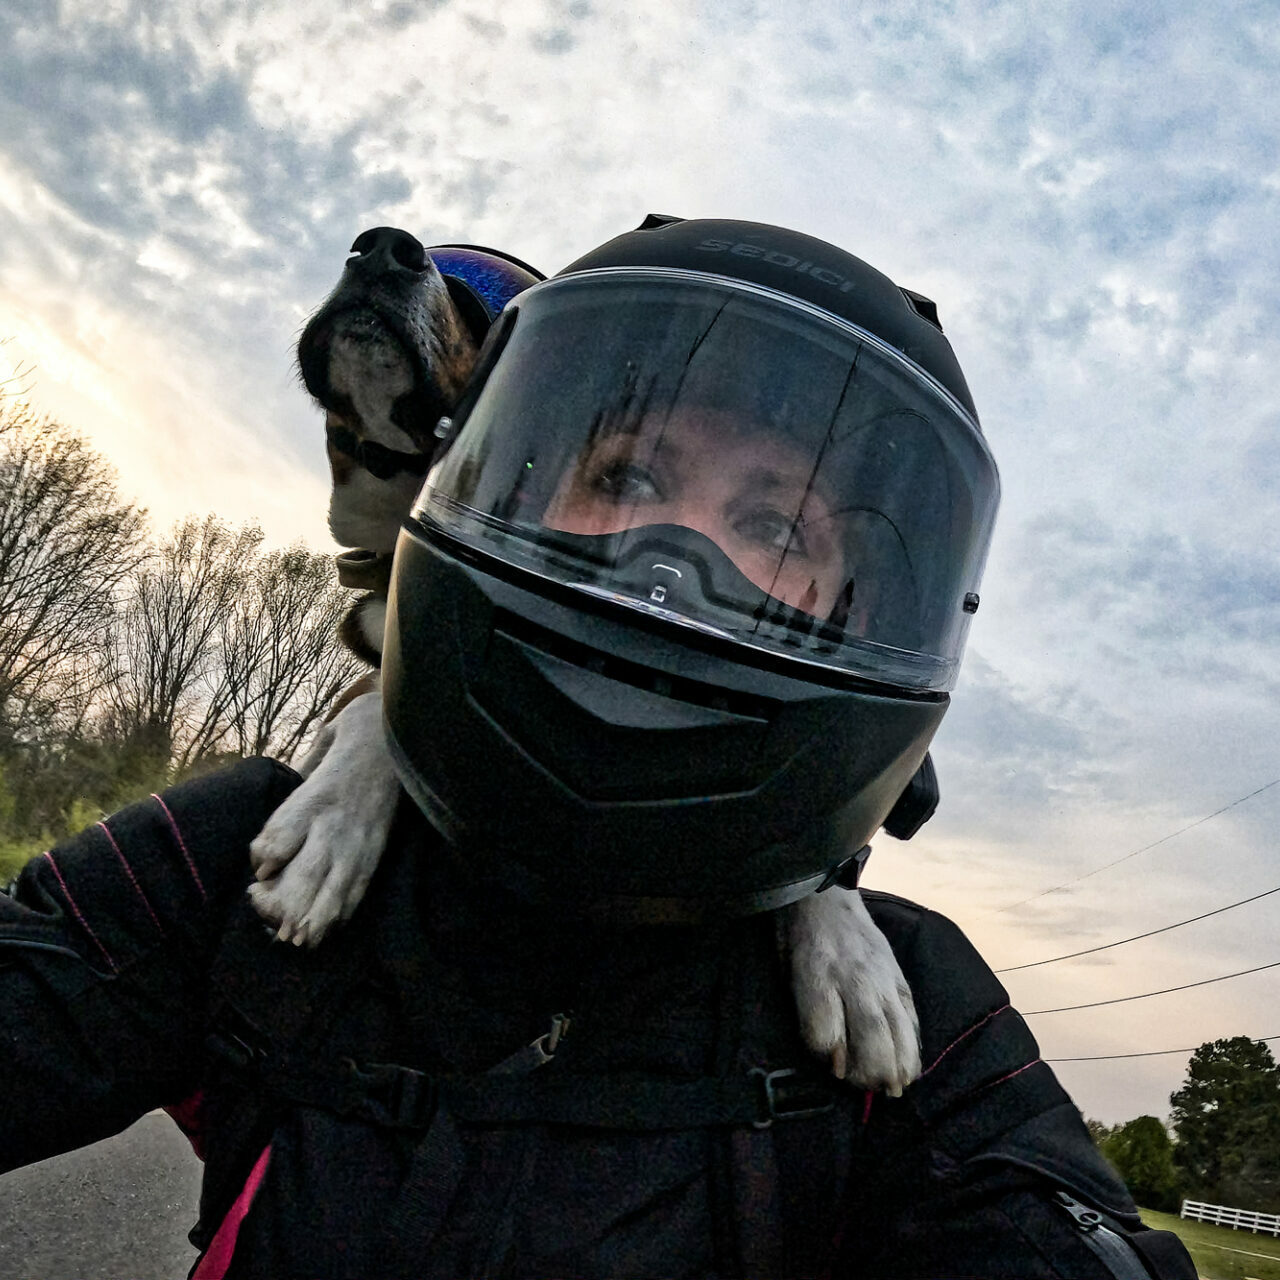 Rachael and her dog riding on motorcycle